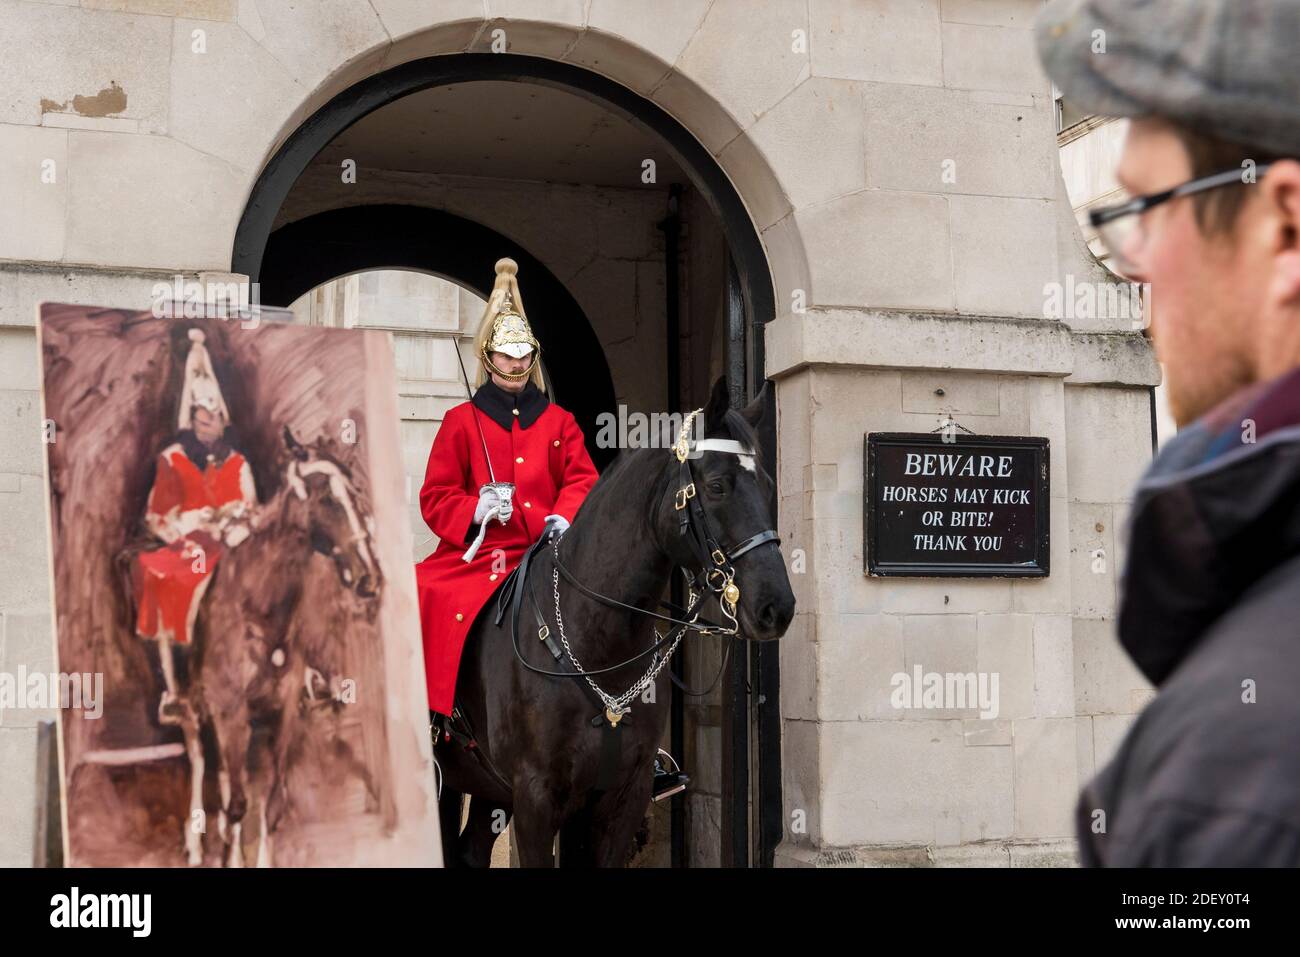 London, UK.  2 December 2020. Artist Rob Pointon creates a painting of a member of the Queen's Life Guard, part of the Household Cavalry, wearing their traditional red tunic, standing guard outside Horse Guards Parade. Credit: Stephen Chung / Alamy Live News Stock Photo